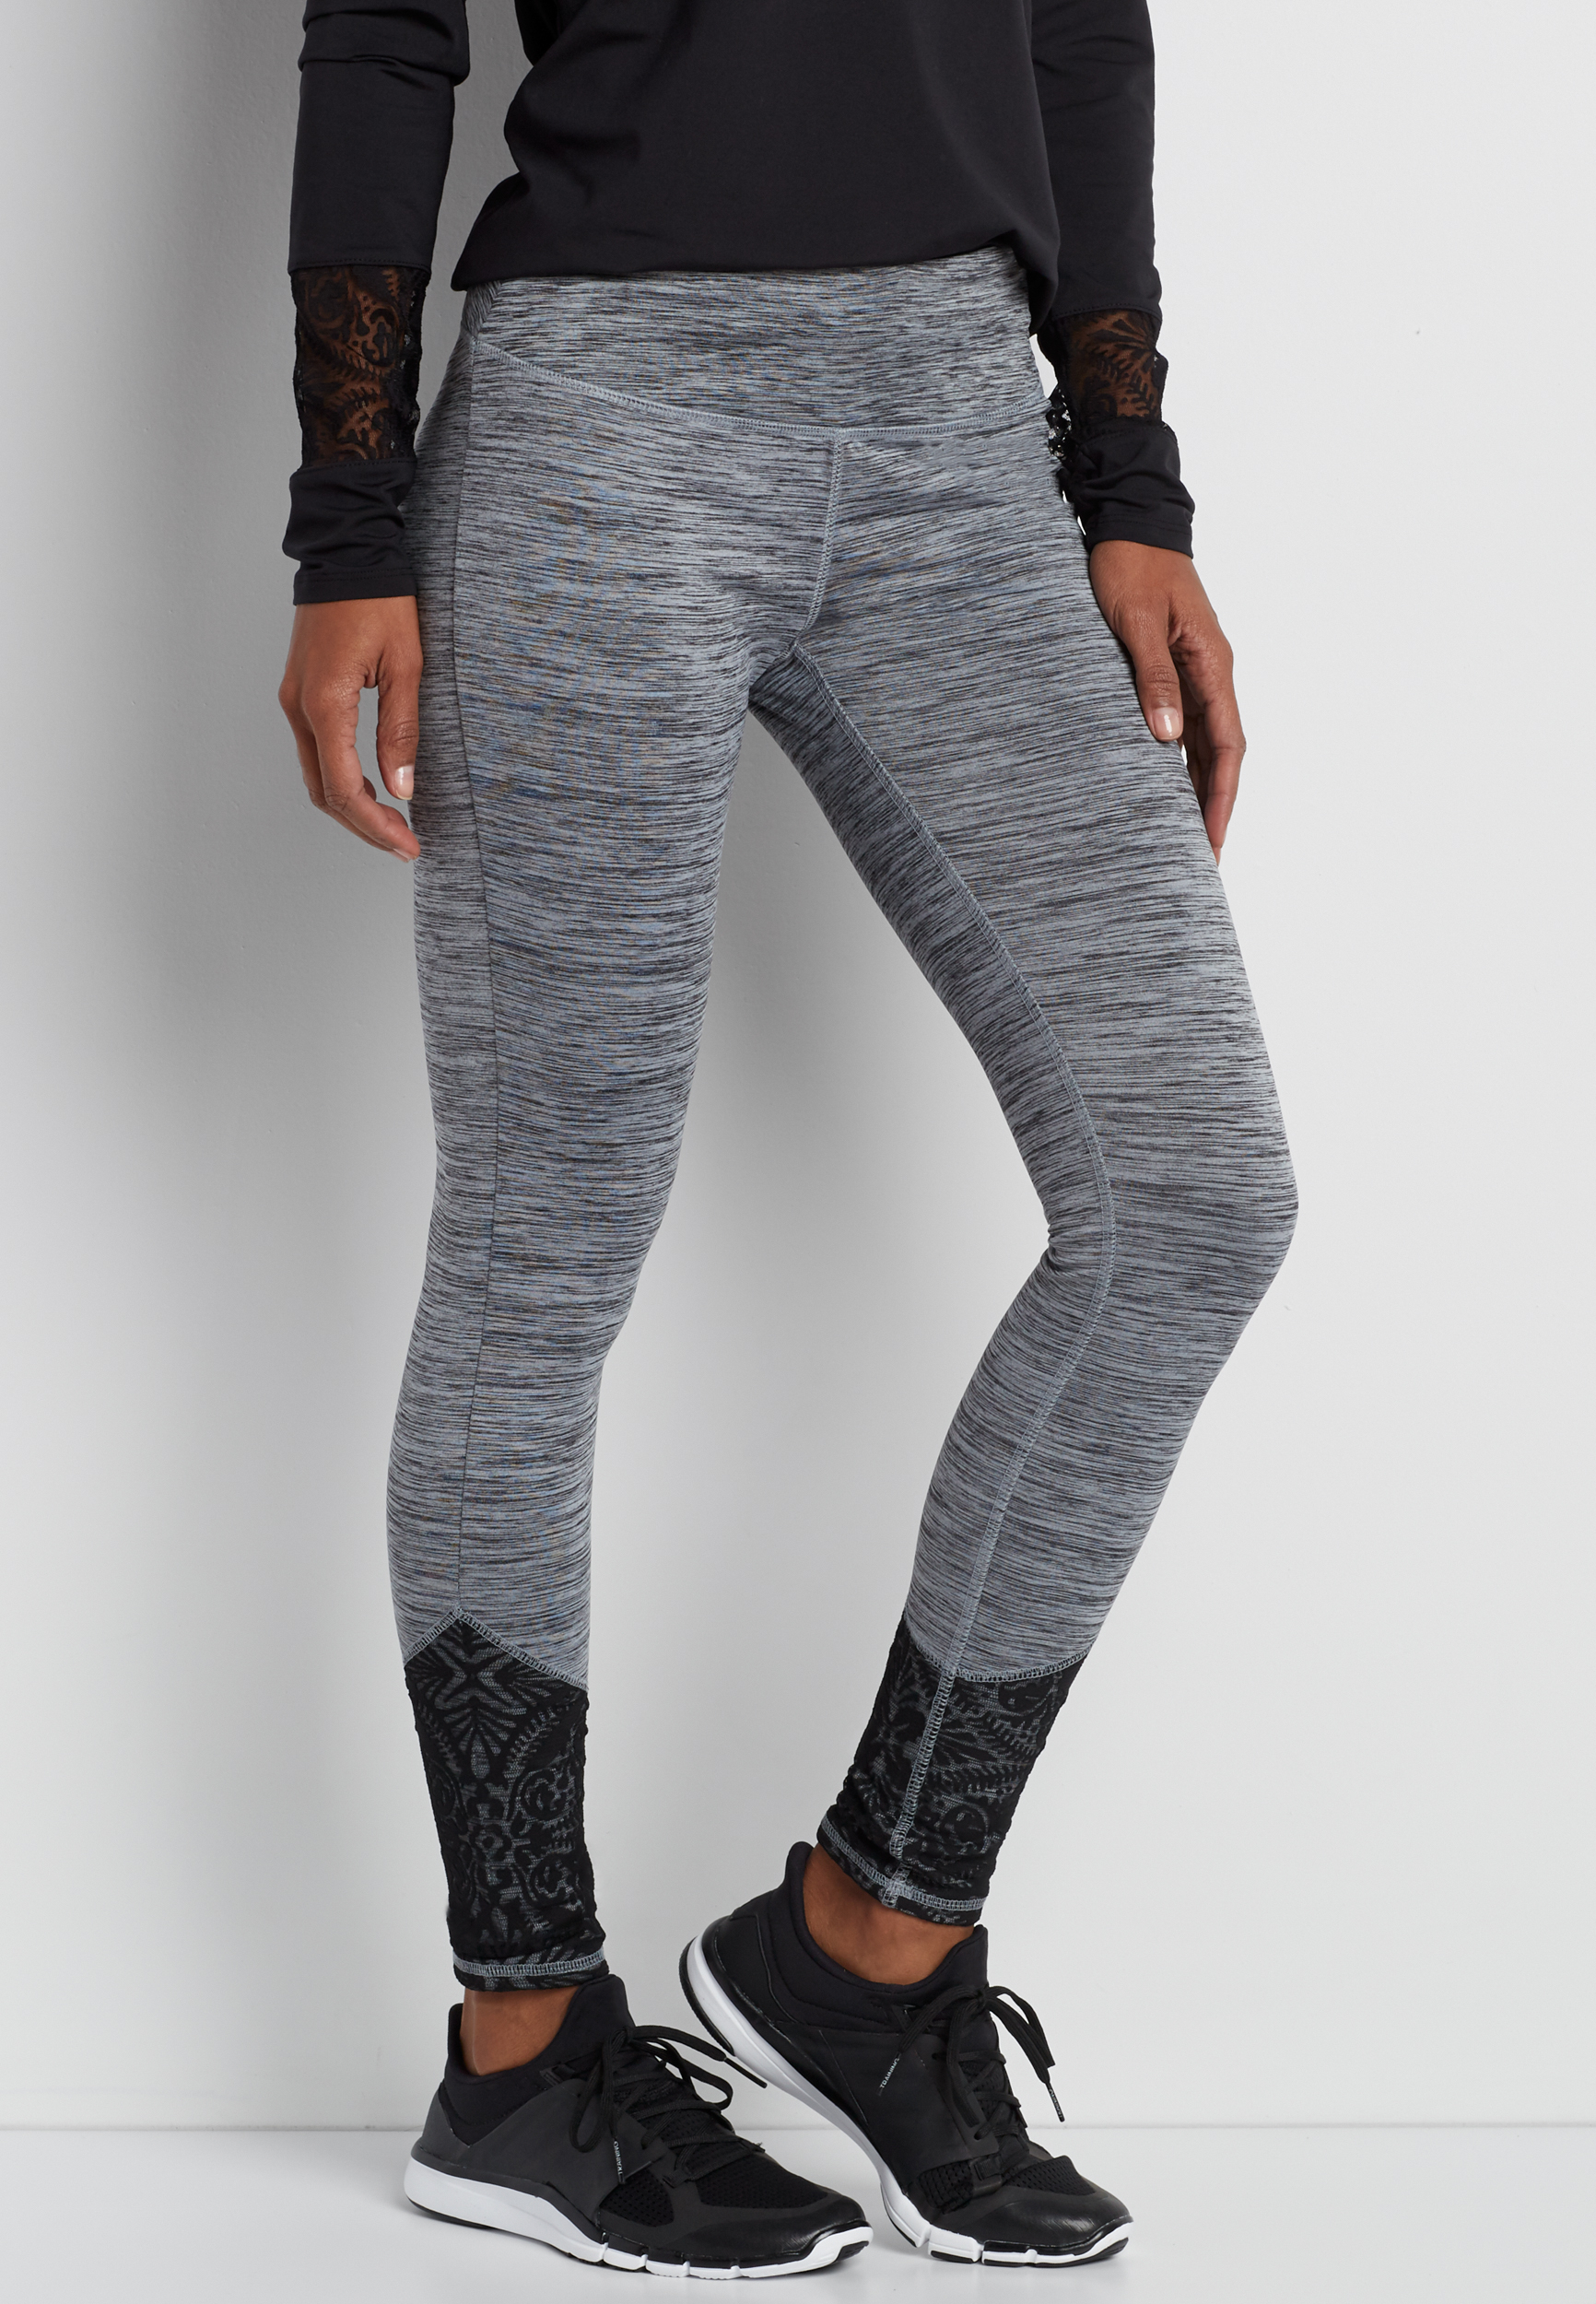 spacedye legging with embroidered mesh overlay | maurices